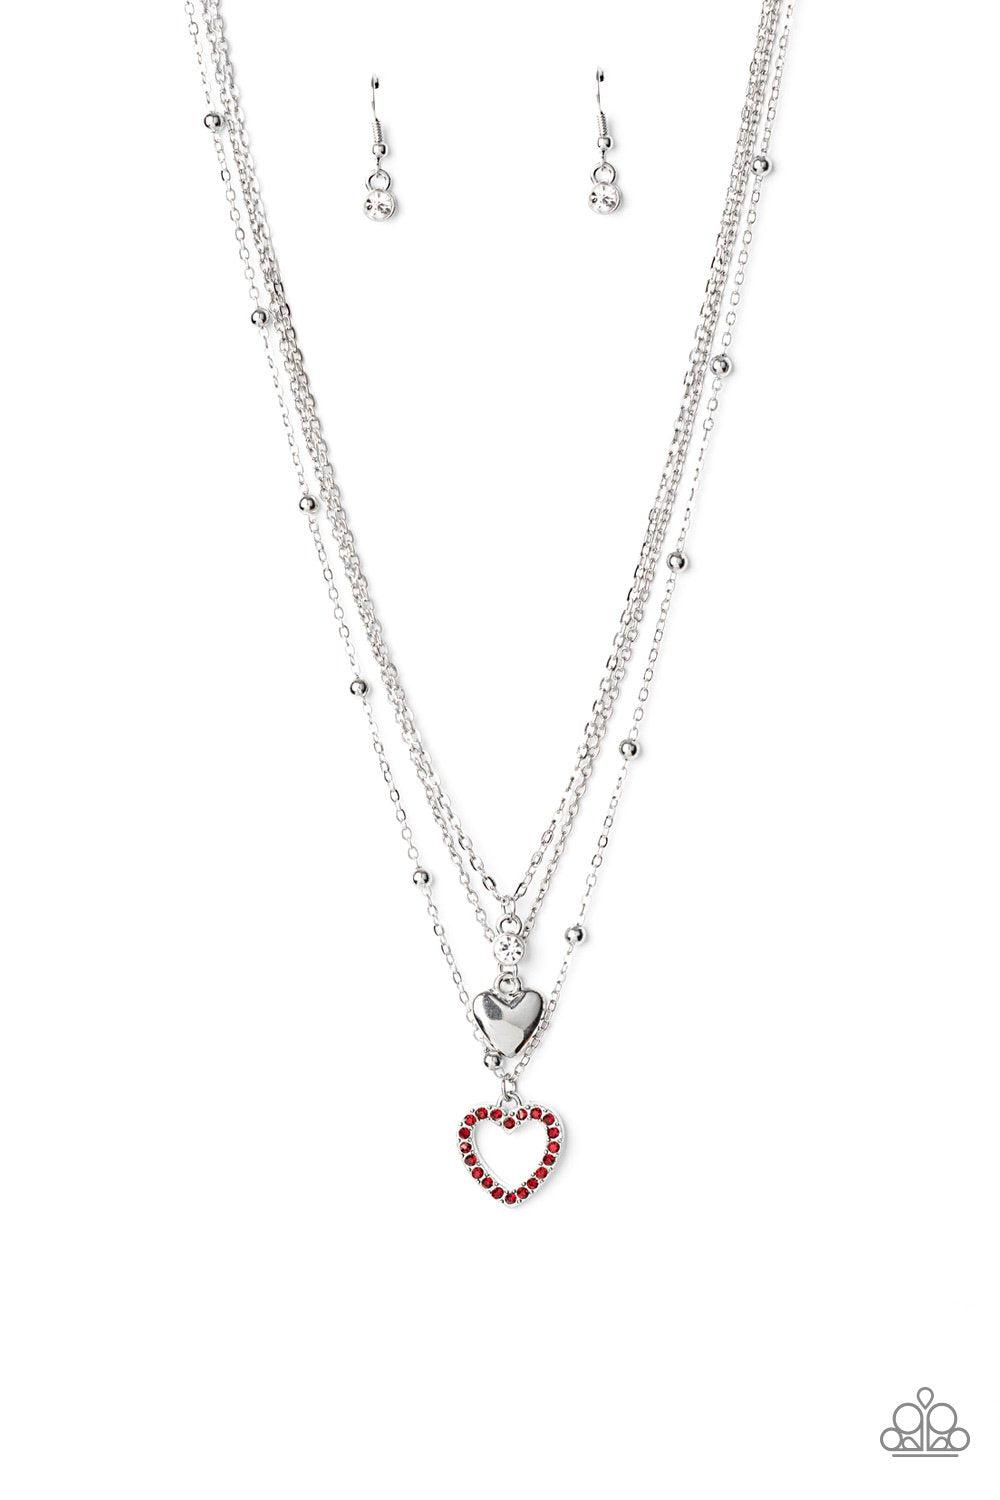 Never Miss a Beat Red Rhinestone and Silver Heart Necklace - Paparazzi Accessories - lightbox -CarasShop.com - $5 Jewelry by Cara Jewels